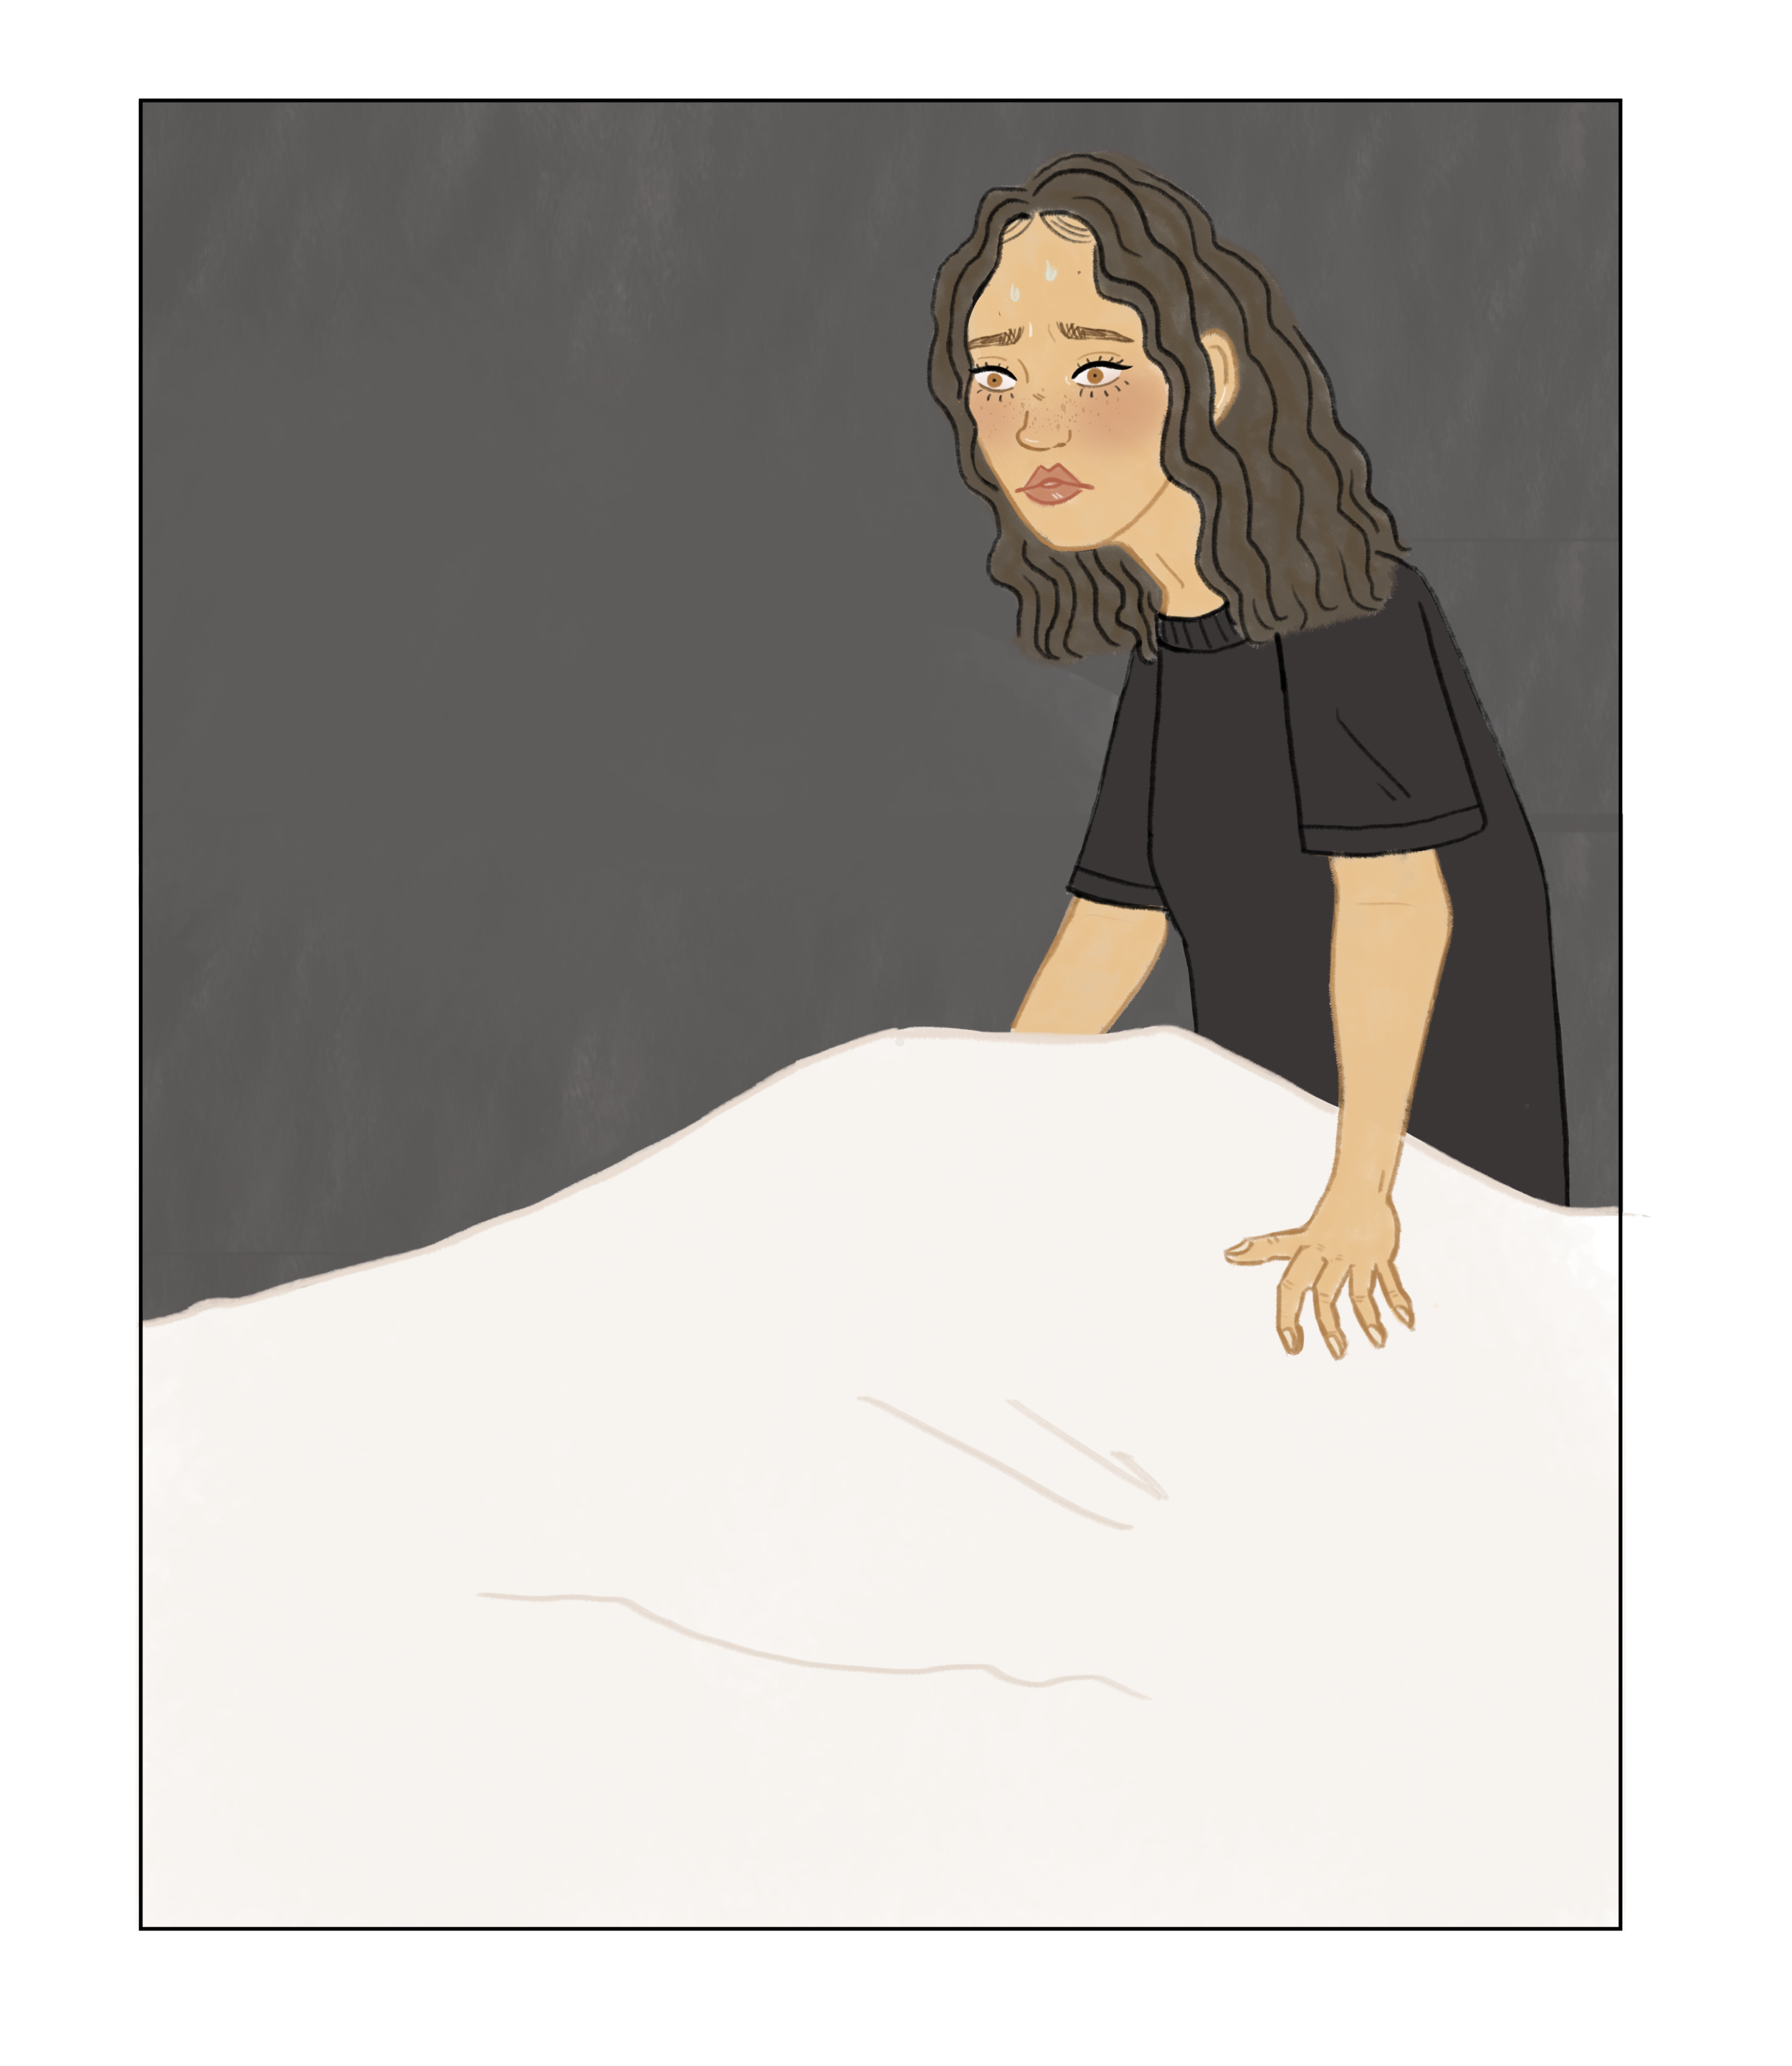  Tasha has difficulty sleeping, and sometimes wakes up in a panic.  Tasha has had some difficult experiences in her childhood that might be connected with the challenges she is having now. 